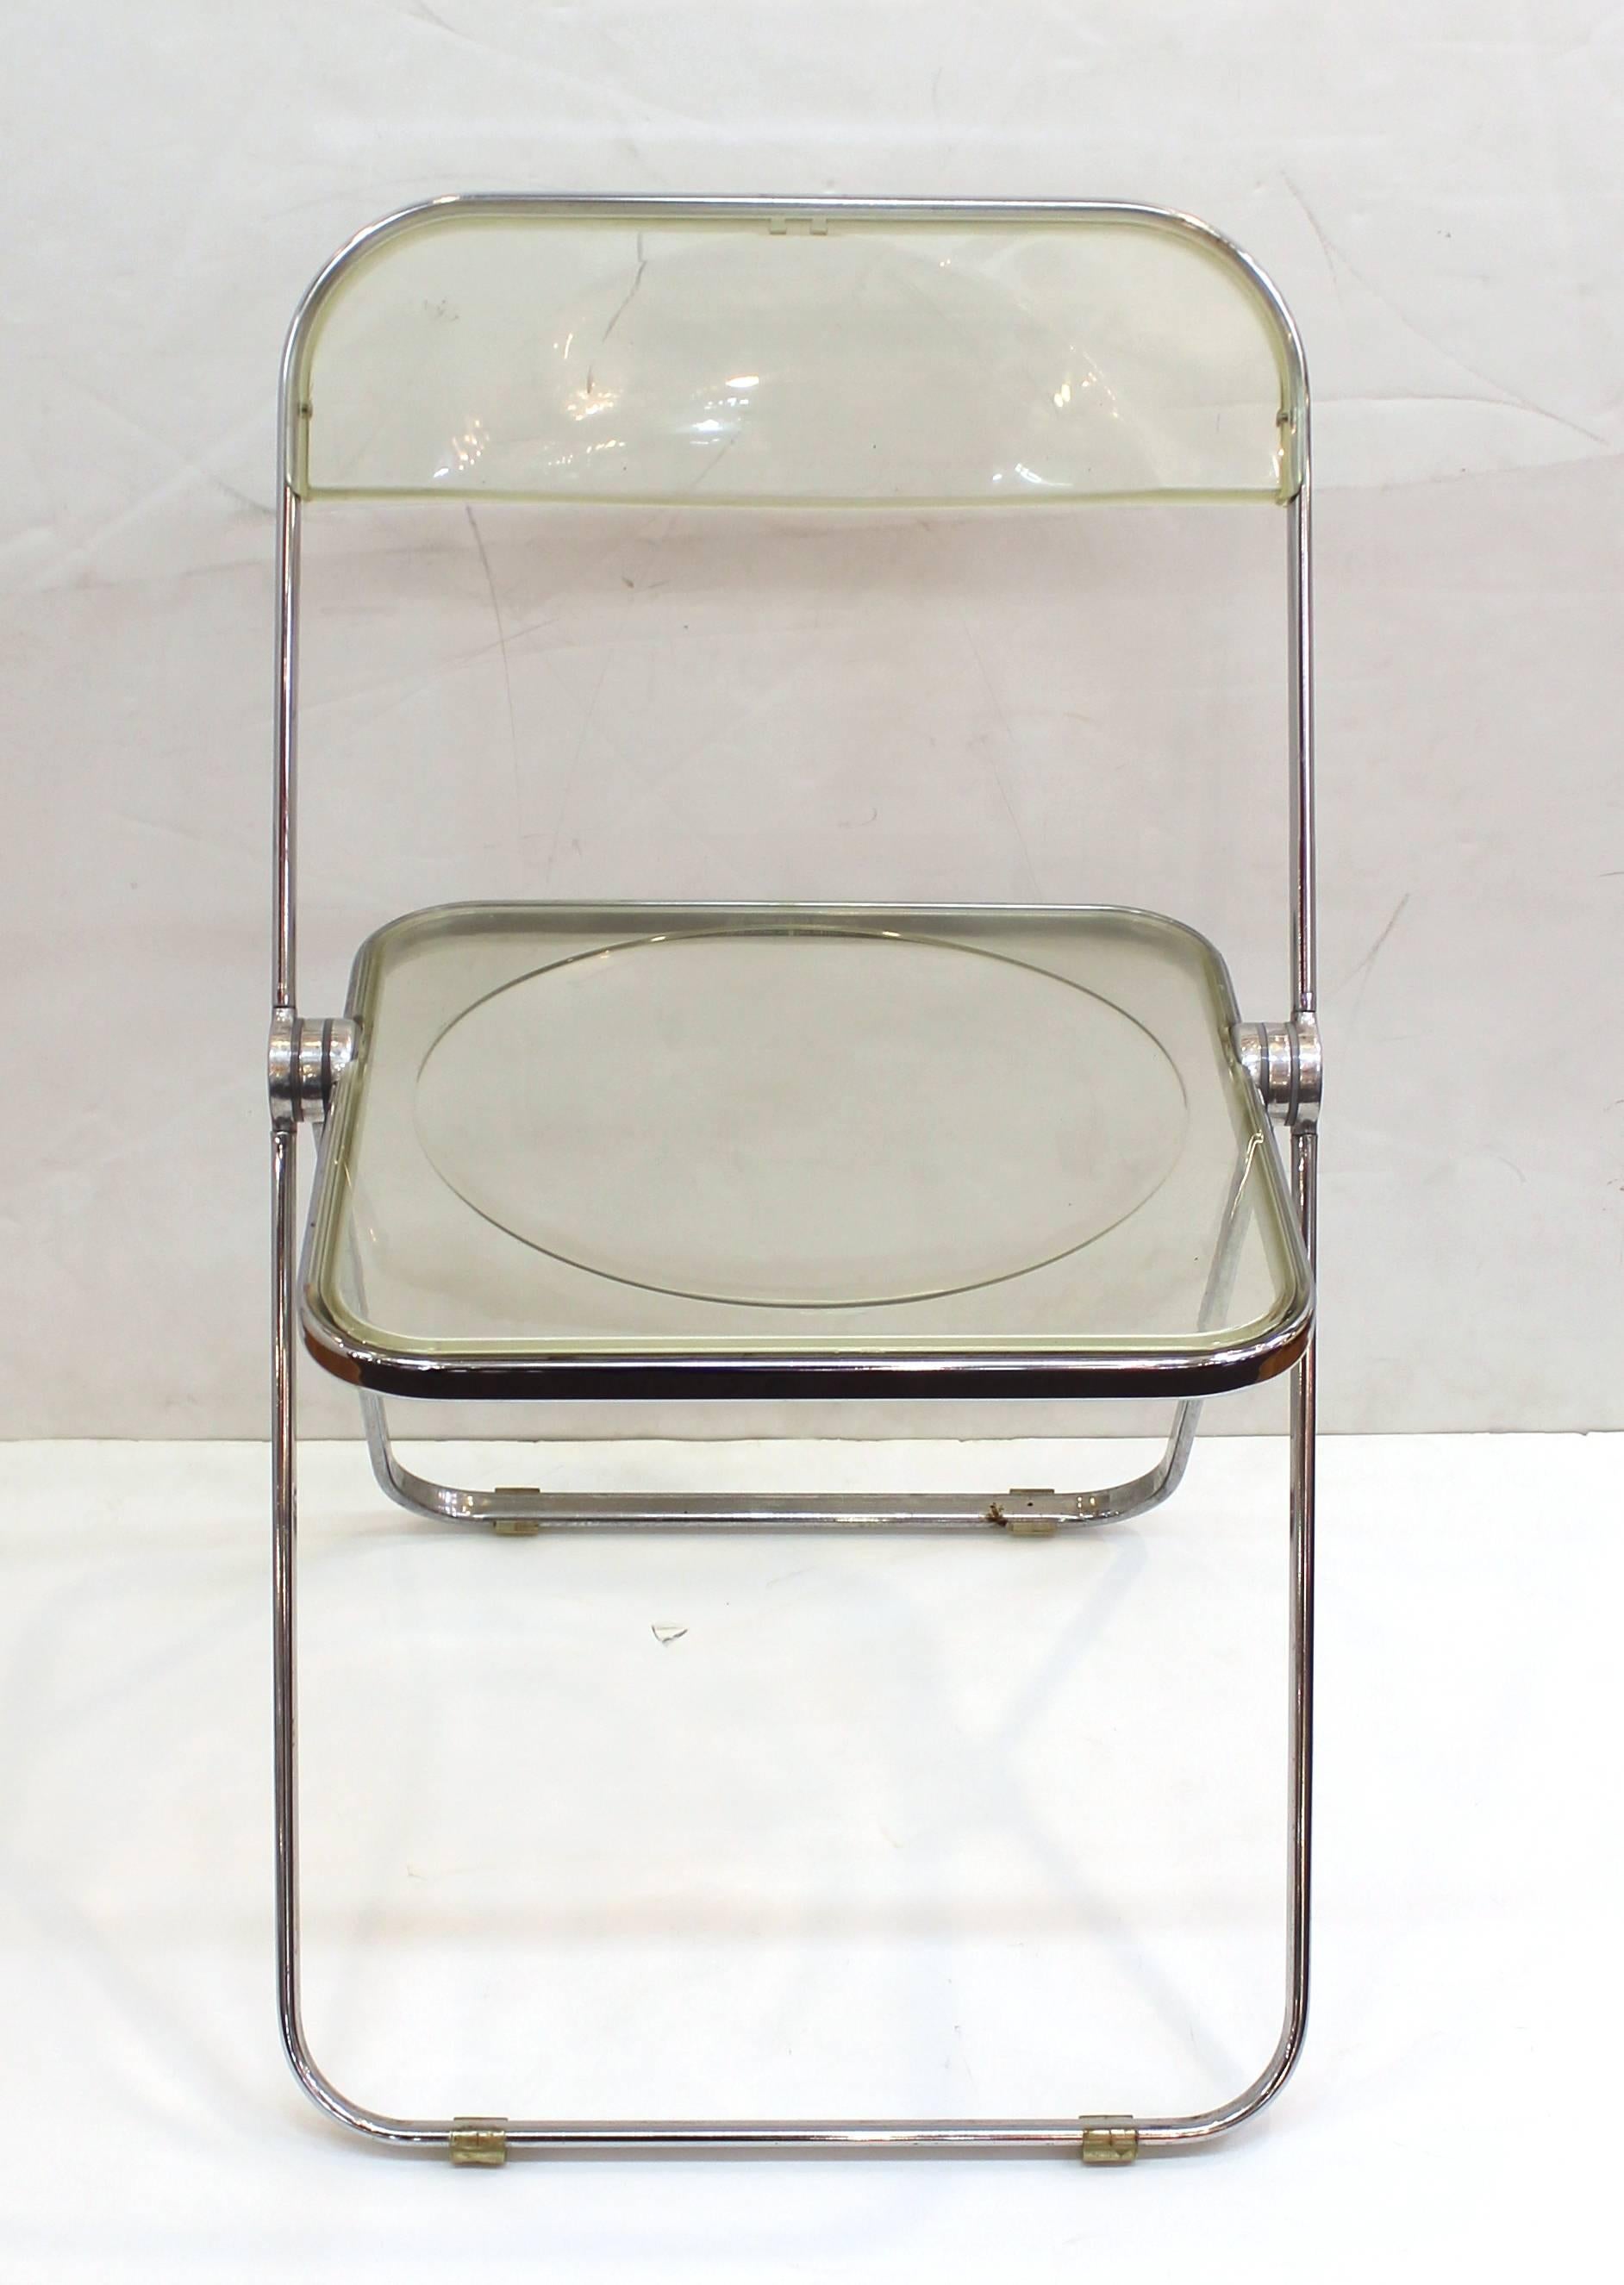 Giancarlo Piretti for Castelli folding 'Pila' chairs in light amber Lucite. The set of five are crafted with modernist frames of chrome over steel. Some of the chairs include the original label. Wear appropriate to age and use such as tarnish to the